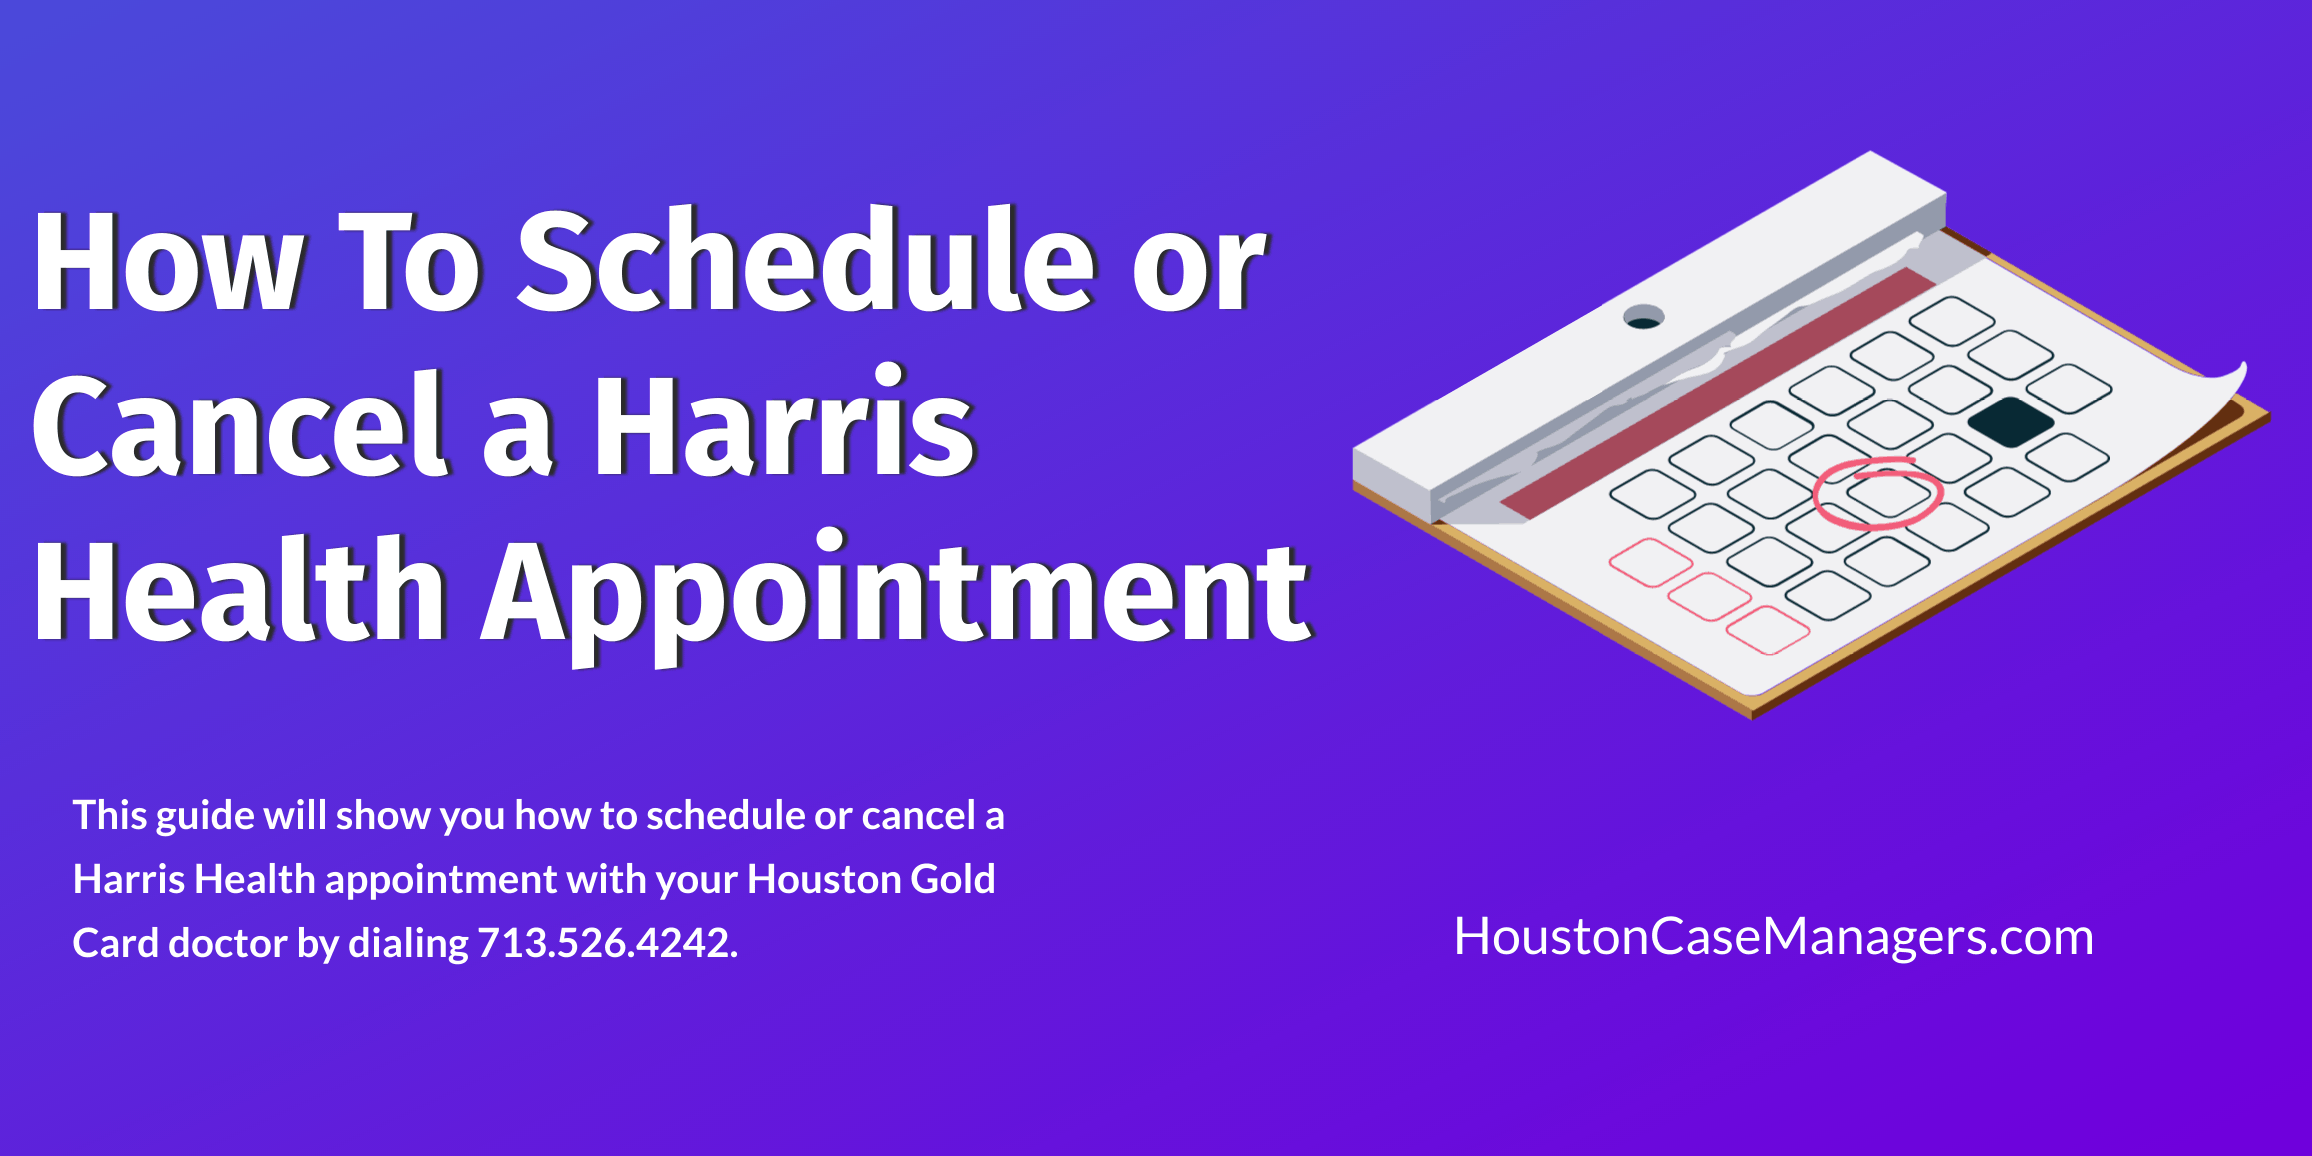 Harris Health appointment